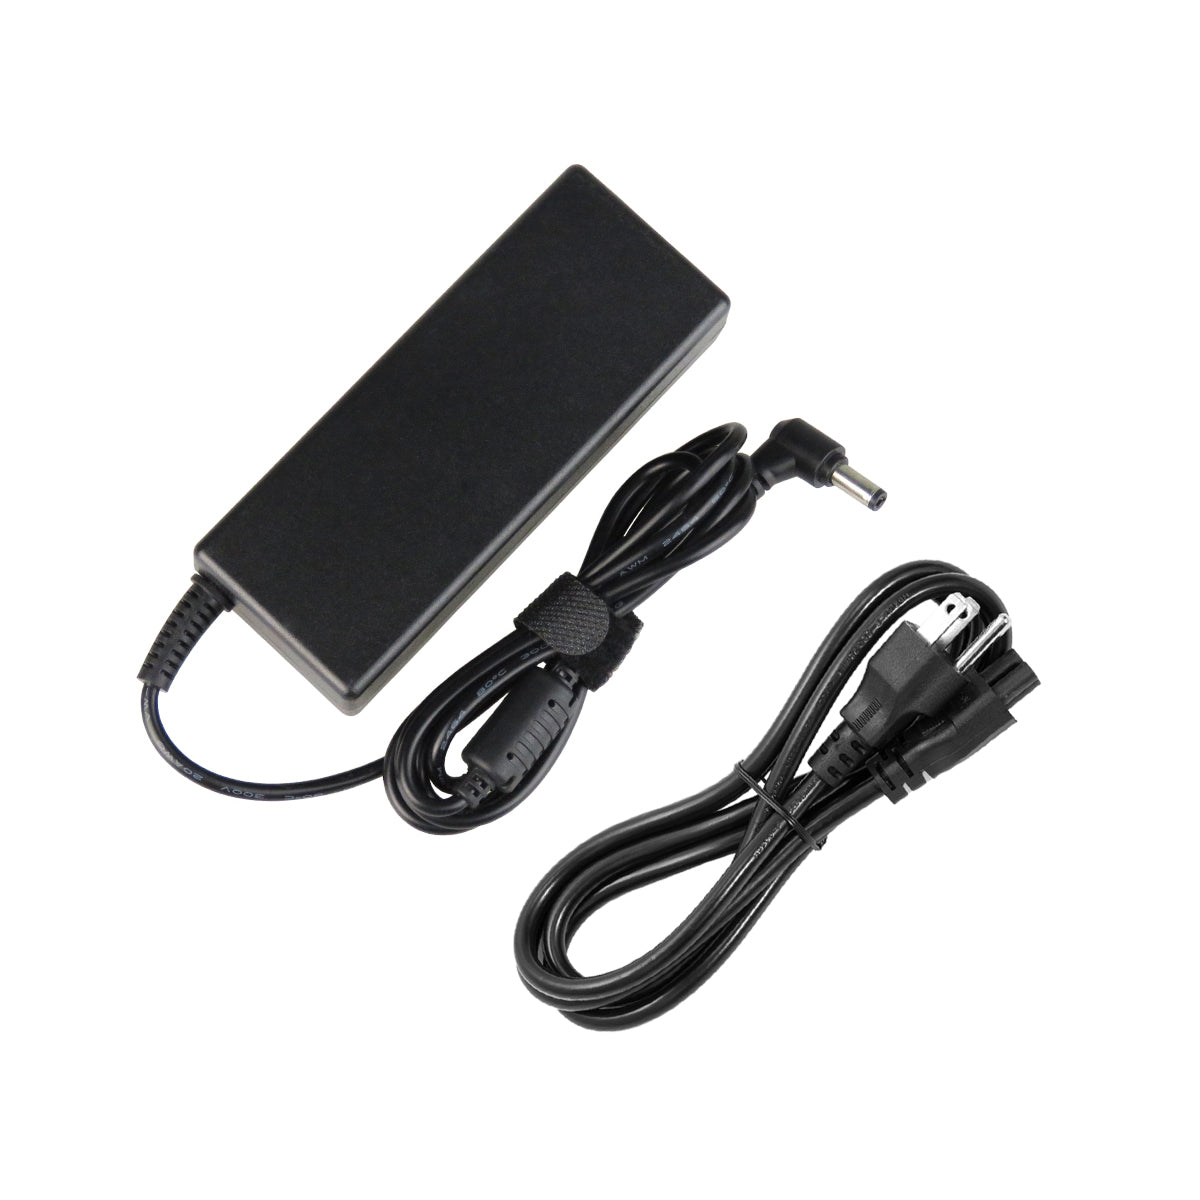 AC Adapter Charger for ASUS A45VJ Notebook.